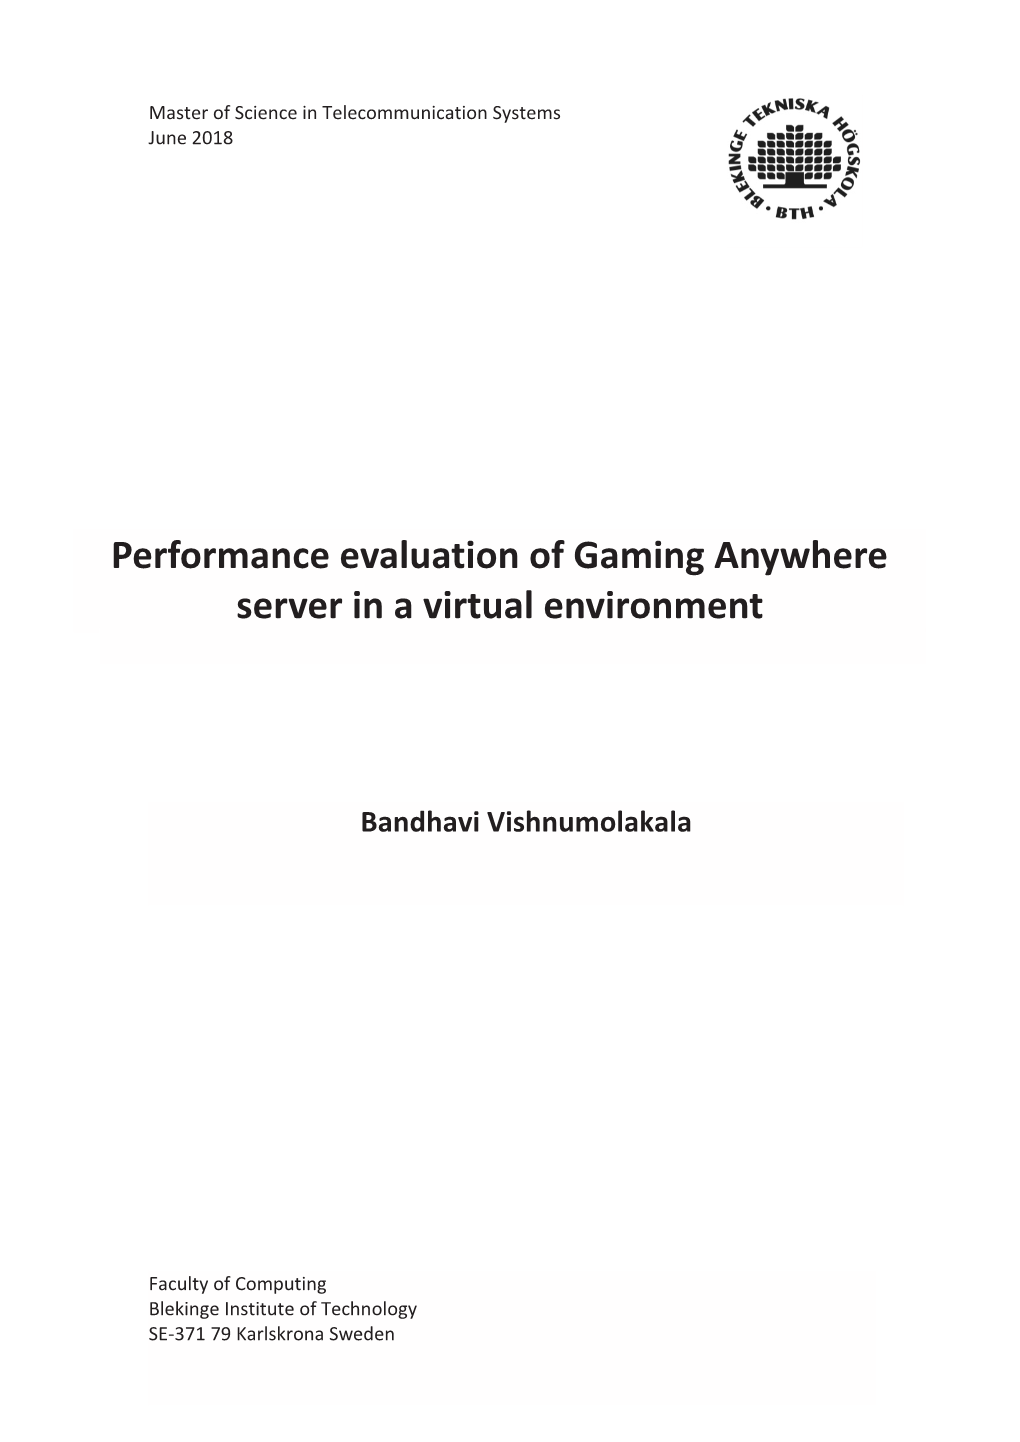 Performance Evaluation of Gaming Anywhere Server in a Virtual Environment